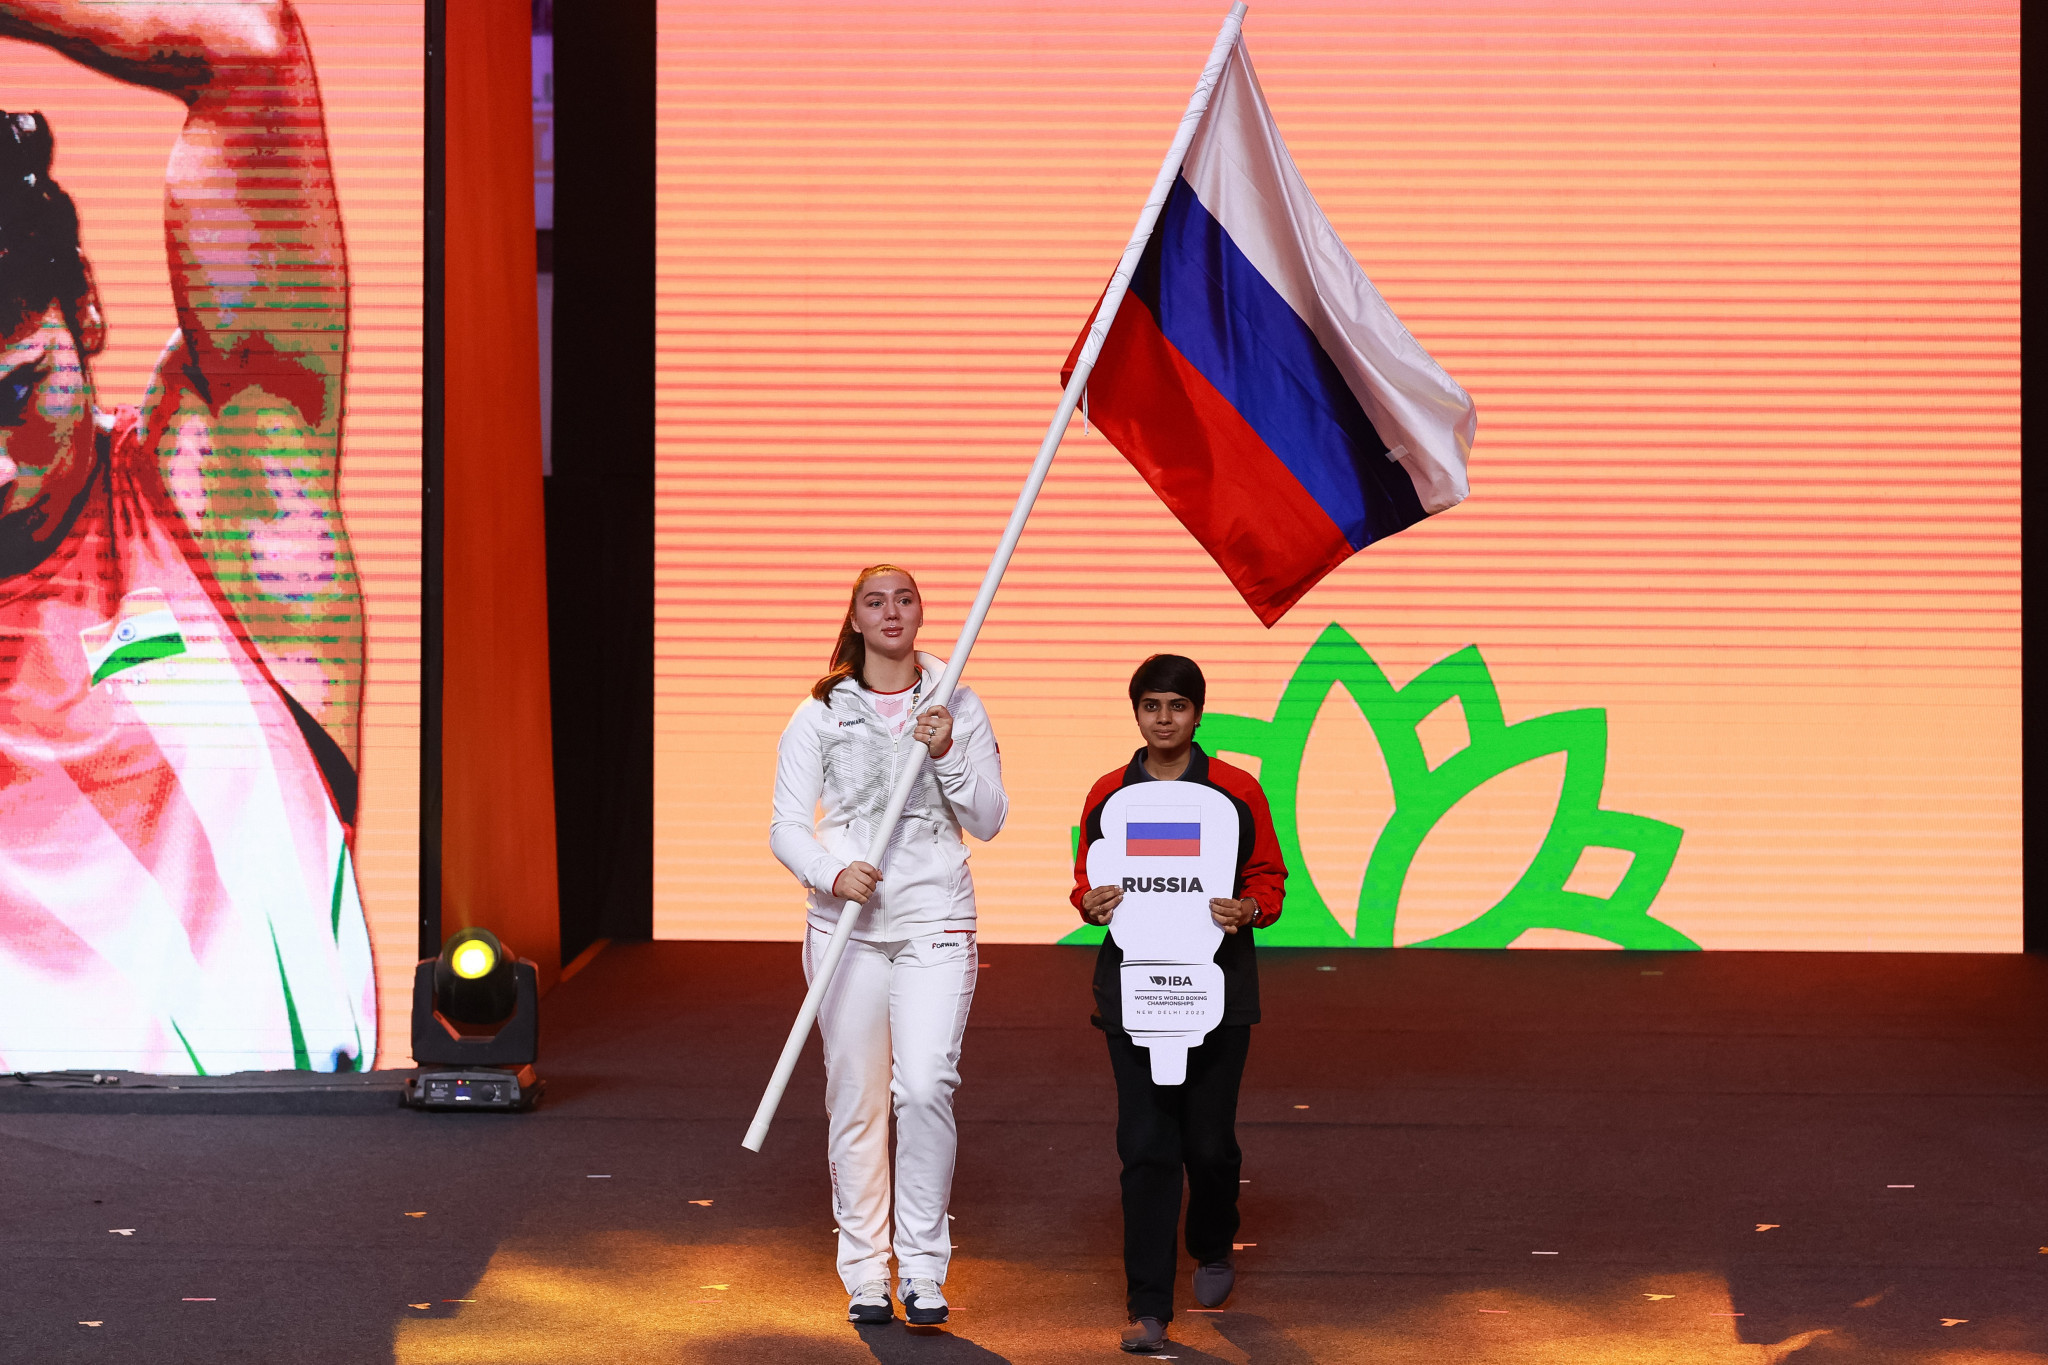 Russia's flag was used at the IBA Women's World Boxing Championships in New Delhi last month ©IBA